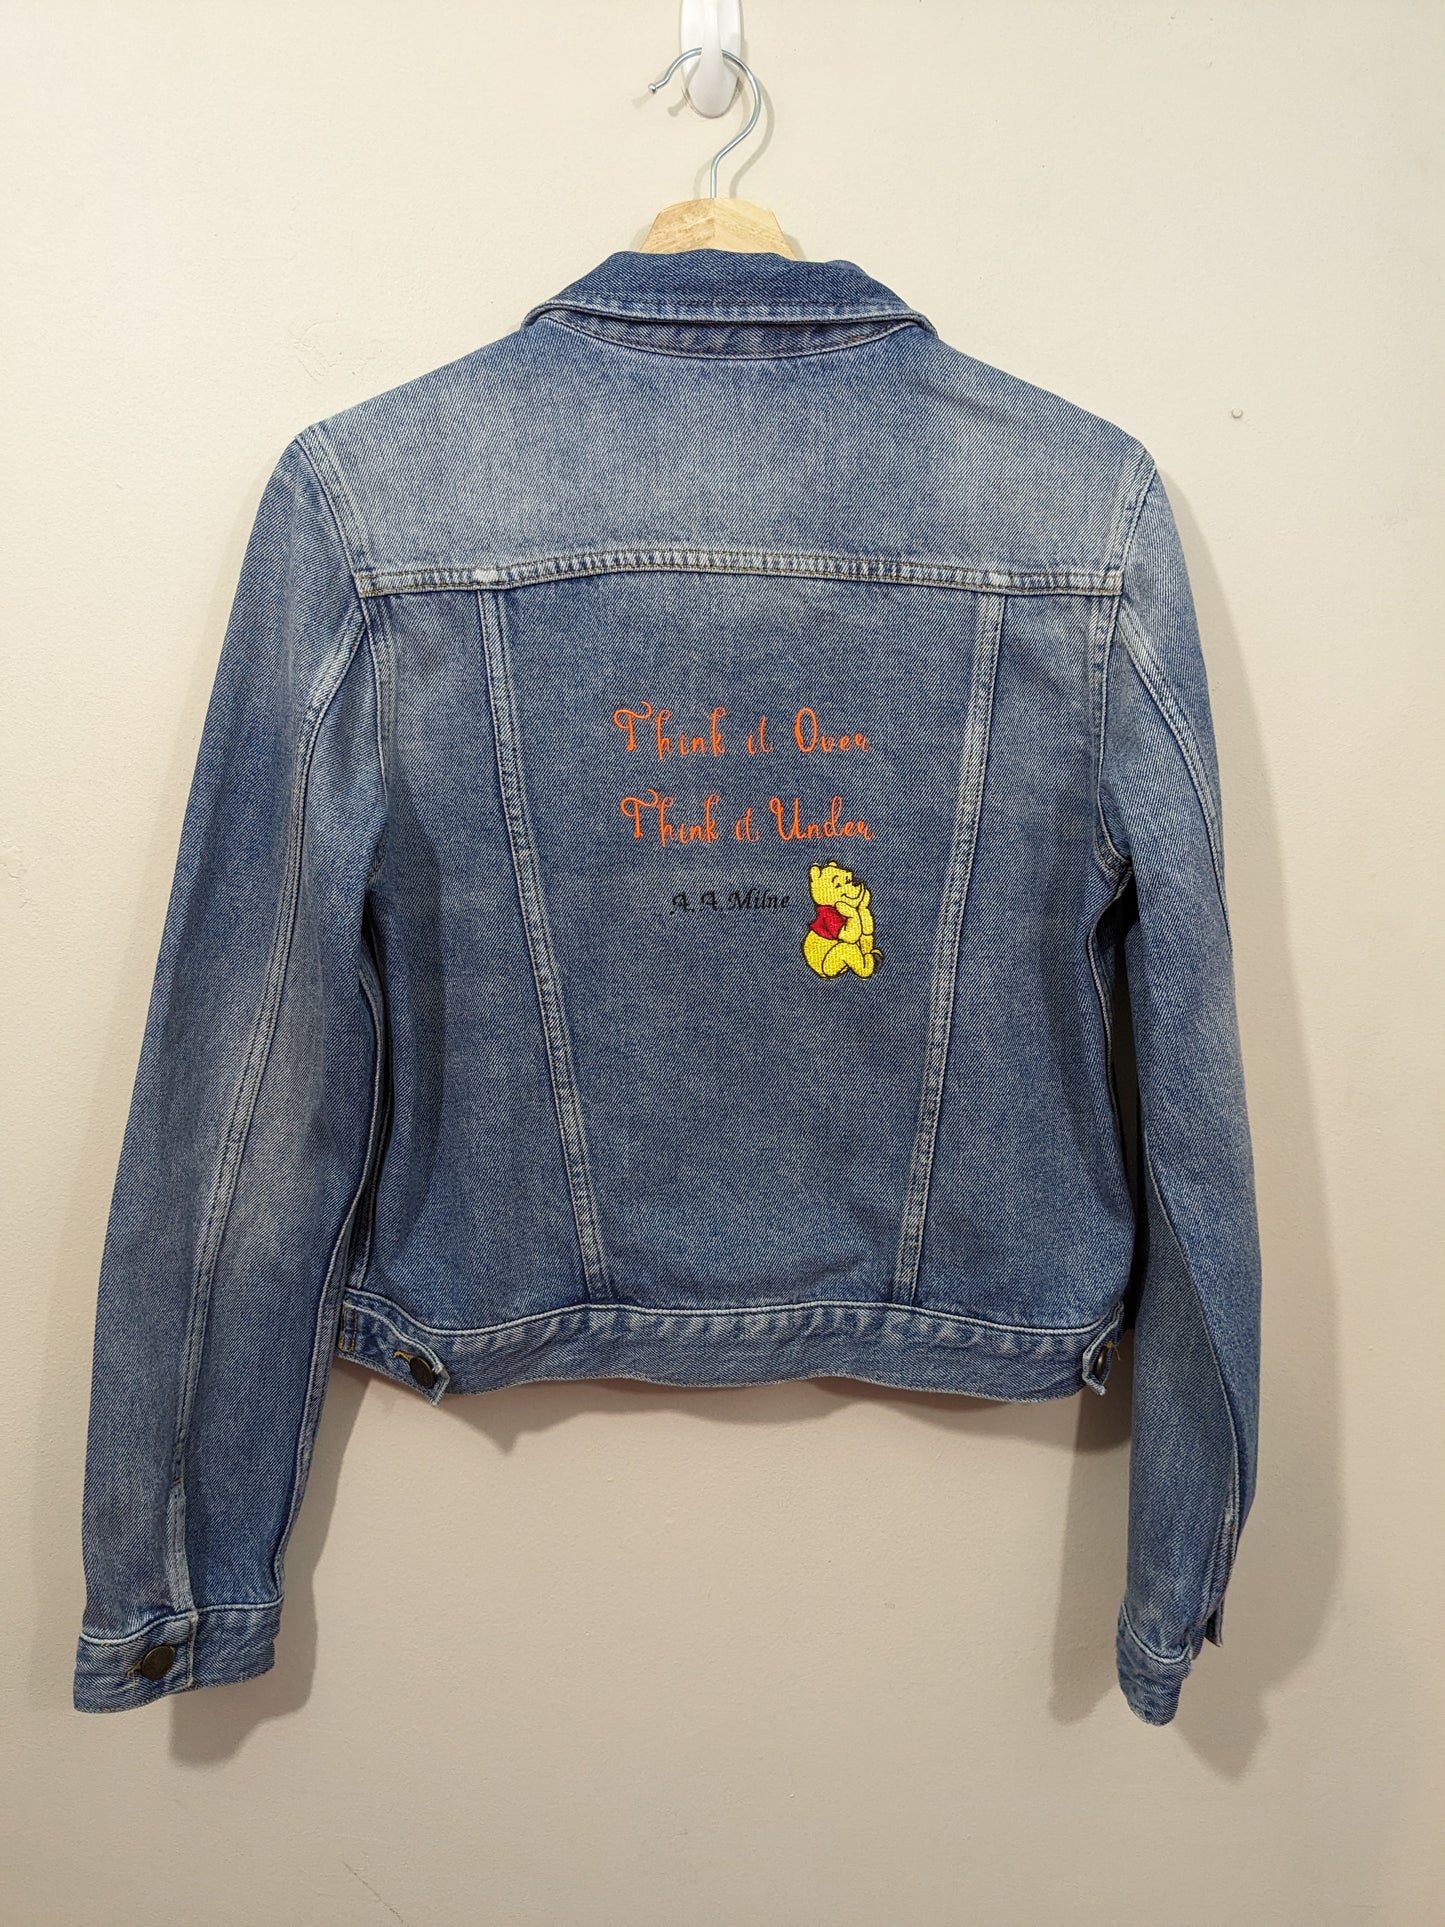 Women's Large Classic Denim Jacket - Embroidered Winnie the Pooh Design - A. A. Milne Bookish